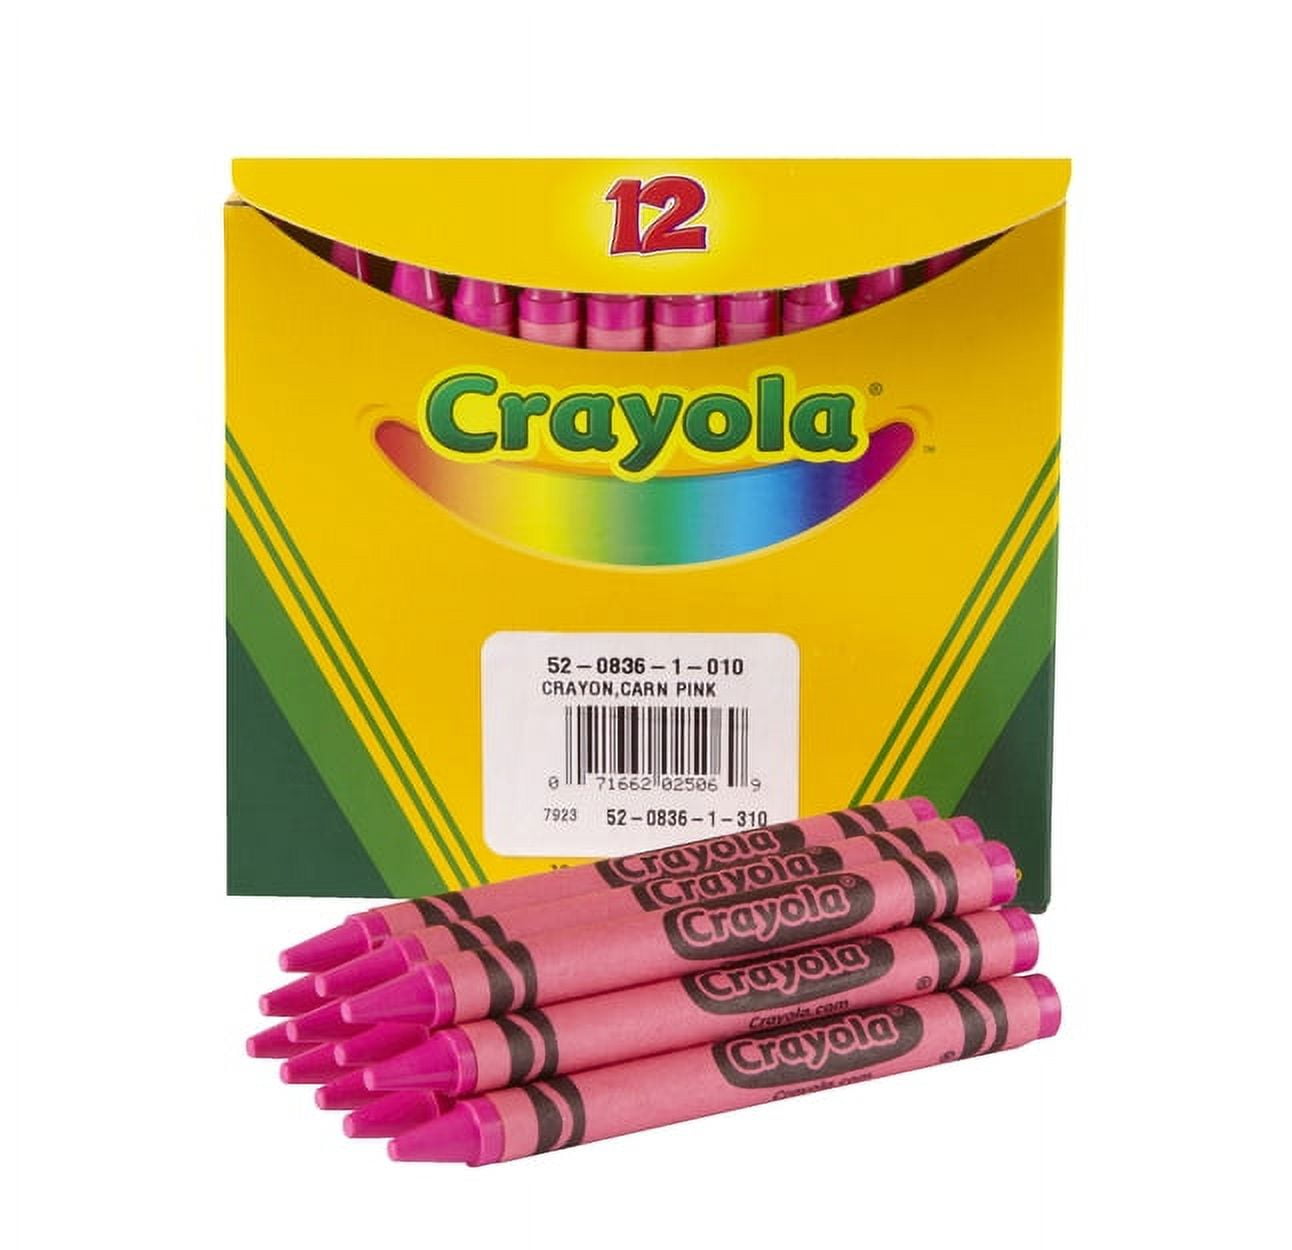 Bulk Crayons for Girls Ages 4-8 Set - Bundle with 48 Crayons for Toddlers Featuring Barbie, Trolls, and Disney Princesses for Party Favors